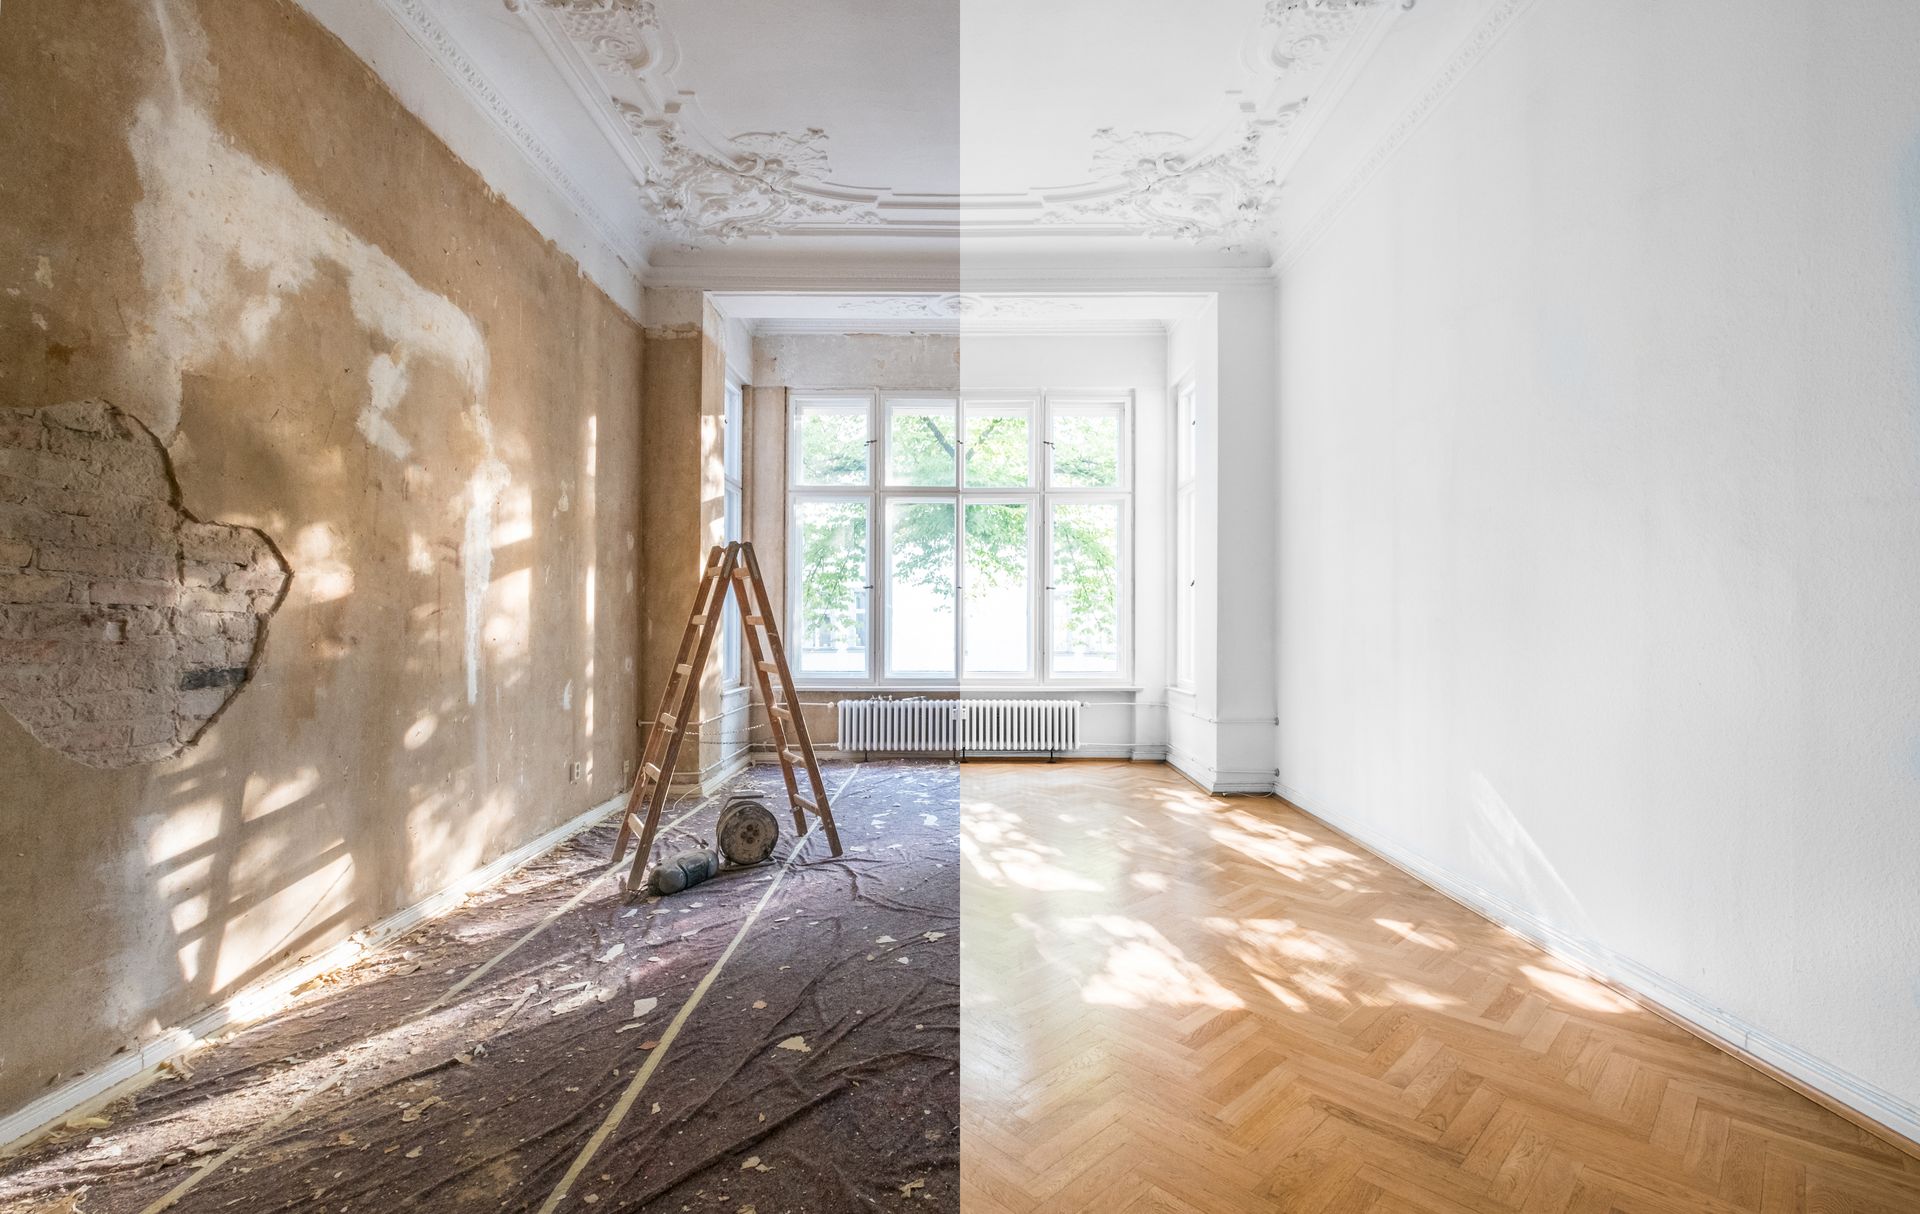 Before and after apartment renovation: Empty room with worn-out flooring and peeling paint, transformed into a stylish, modern living space with new hardwood floors and fresh paint.